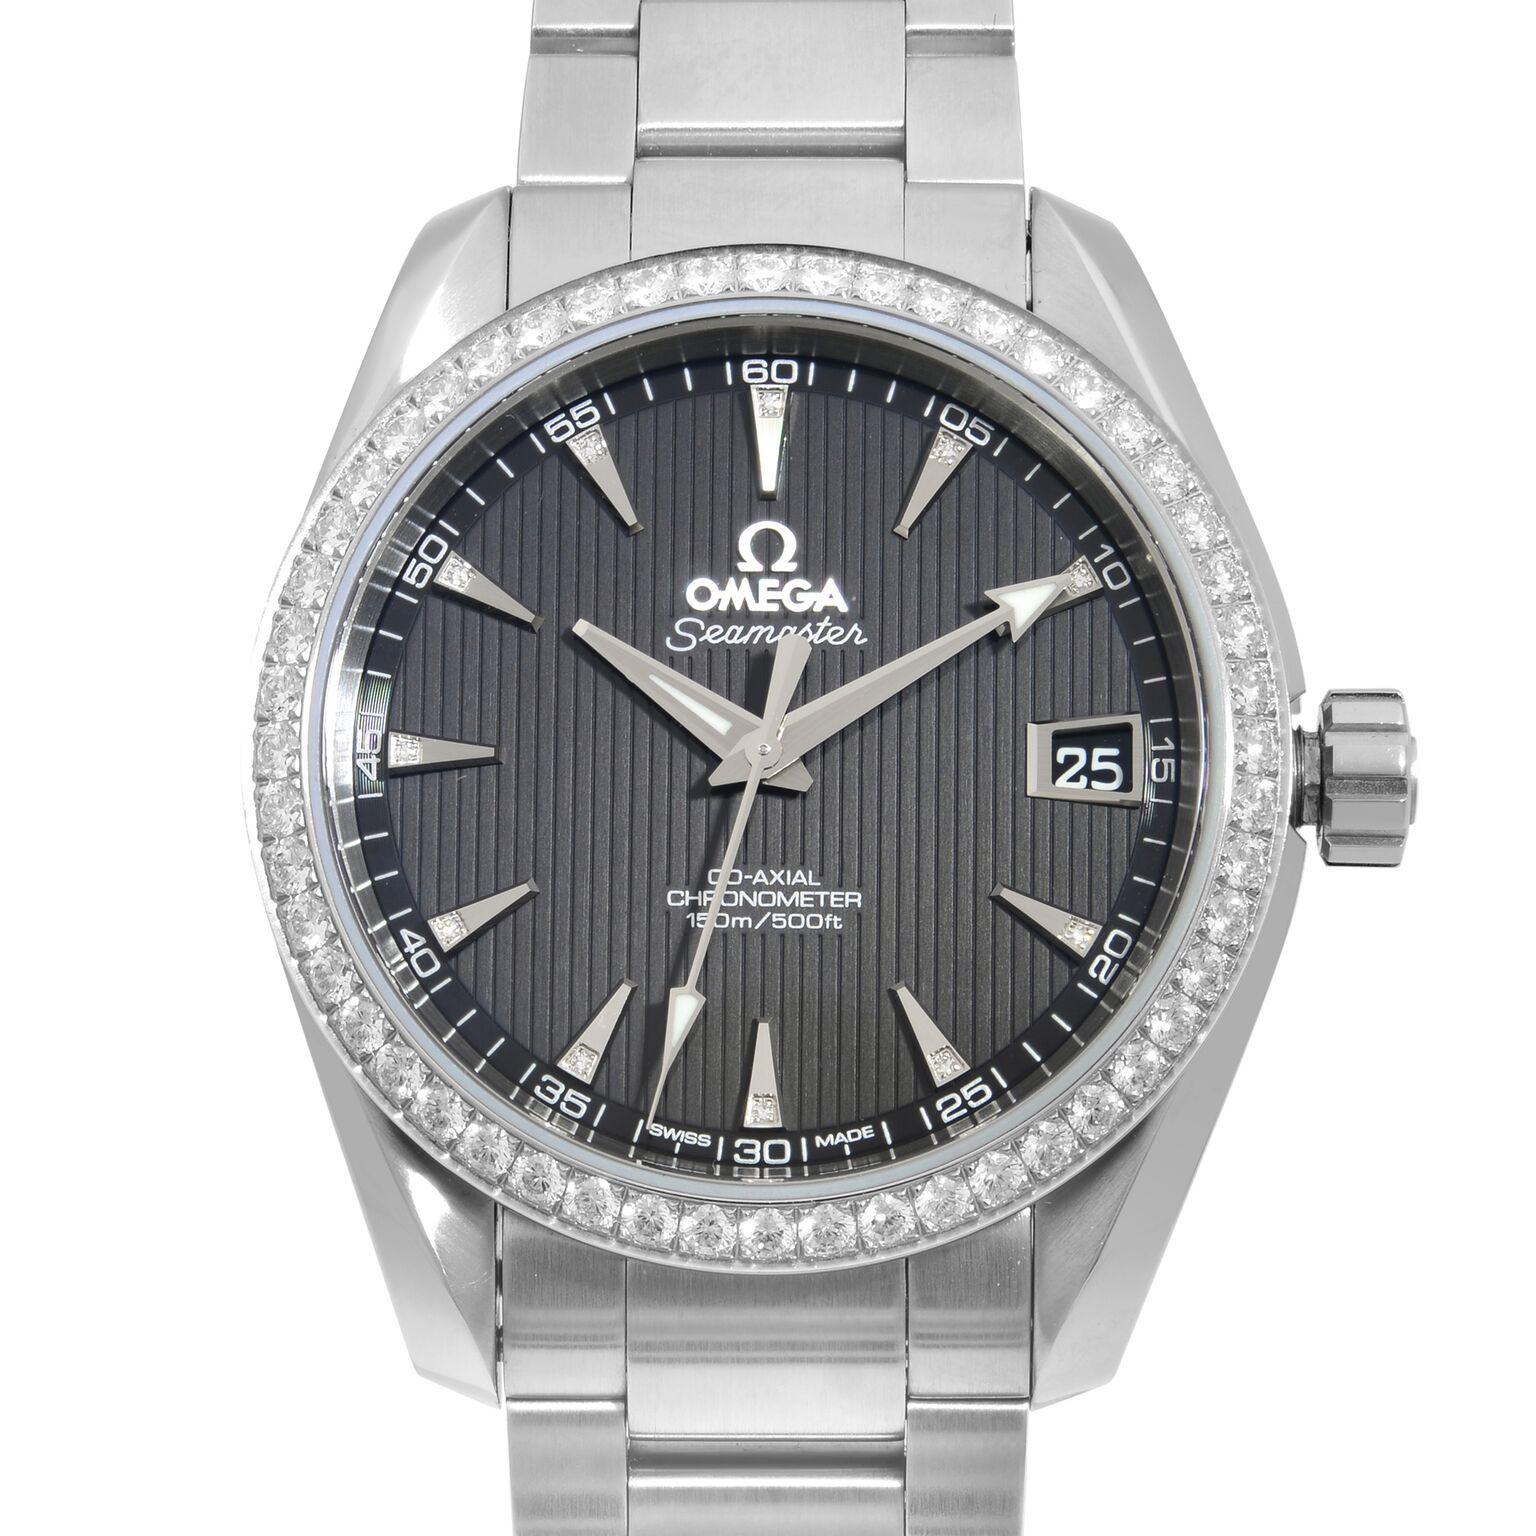 This brand new Omega Seamaster 231.15.39.21.51.001 is a beautiful Unisex timepiece that is powered by mechanical (automatic) movement which is cased in a stainless steel case. It has a round shape face, date indicator, diamonds dial and has hand